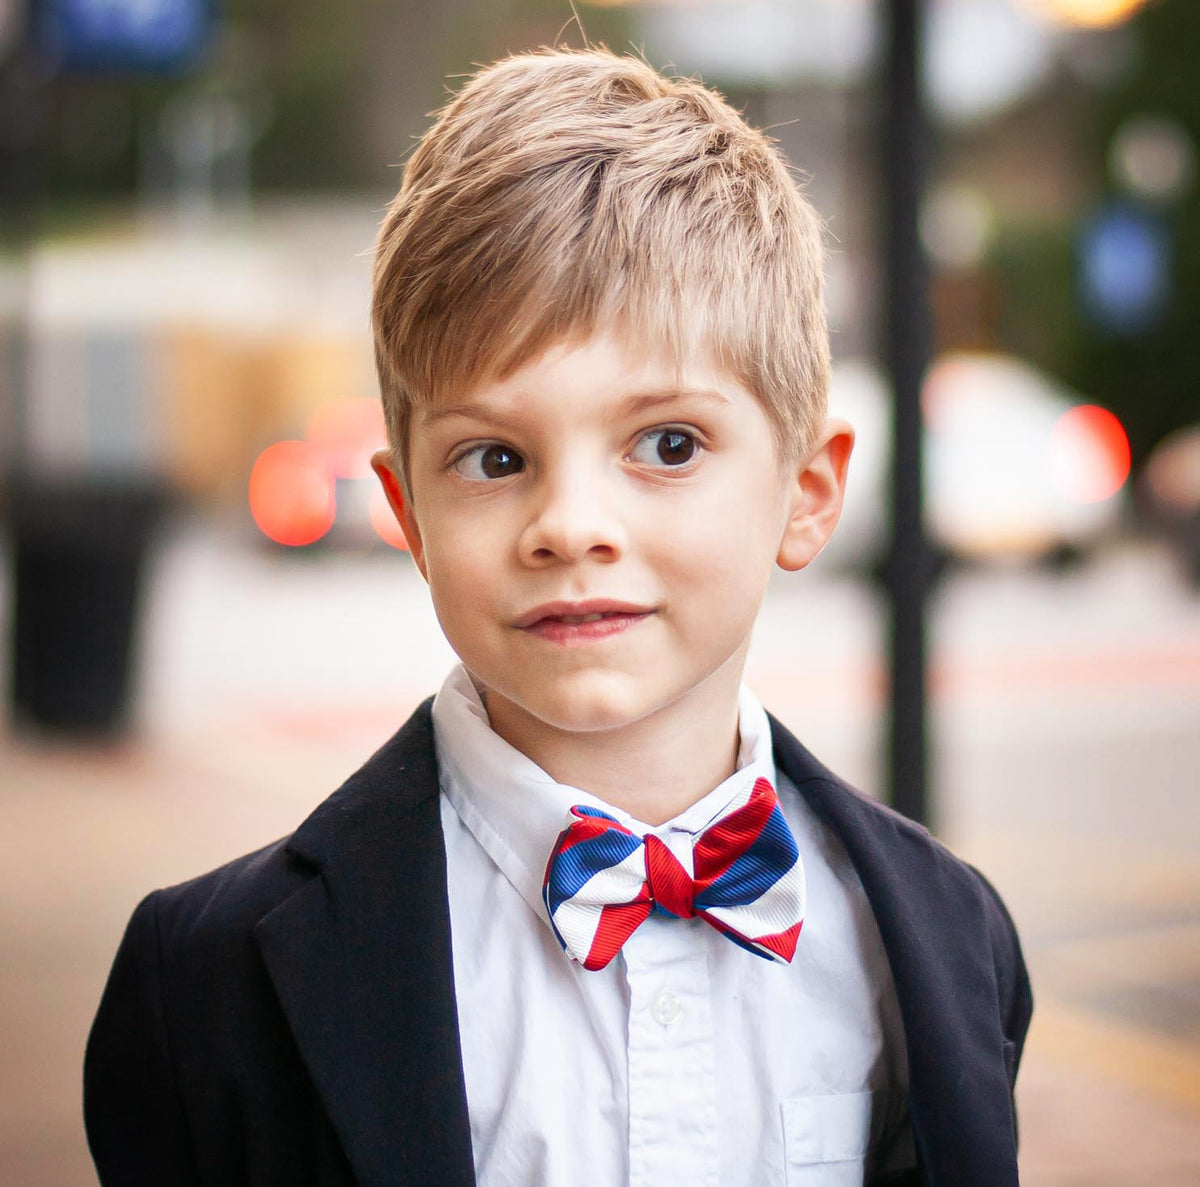 Bow Ties for Boys - A Guide, R. Hanauer Bow Ties & Accessories